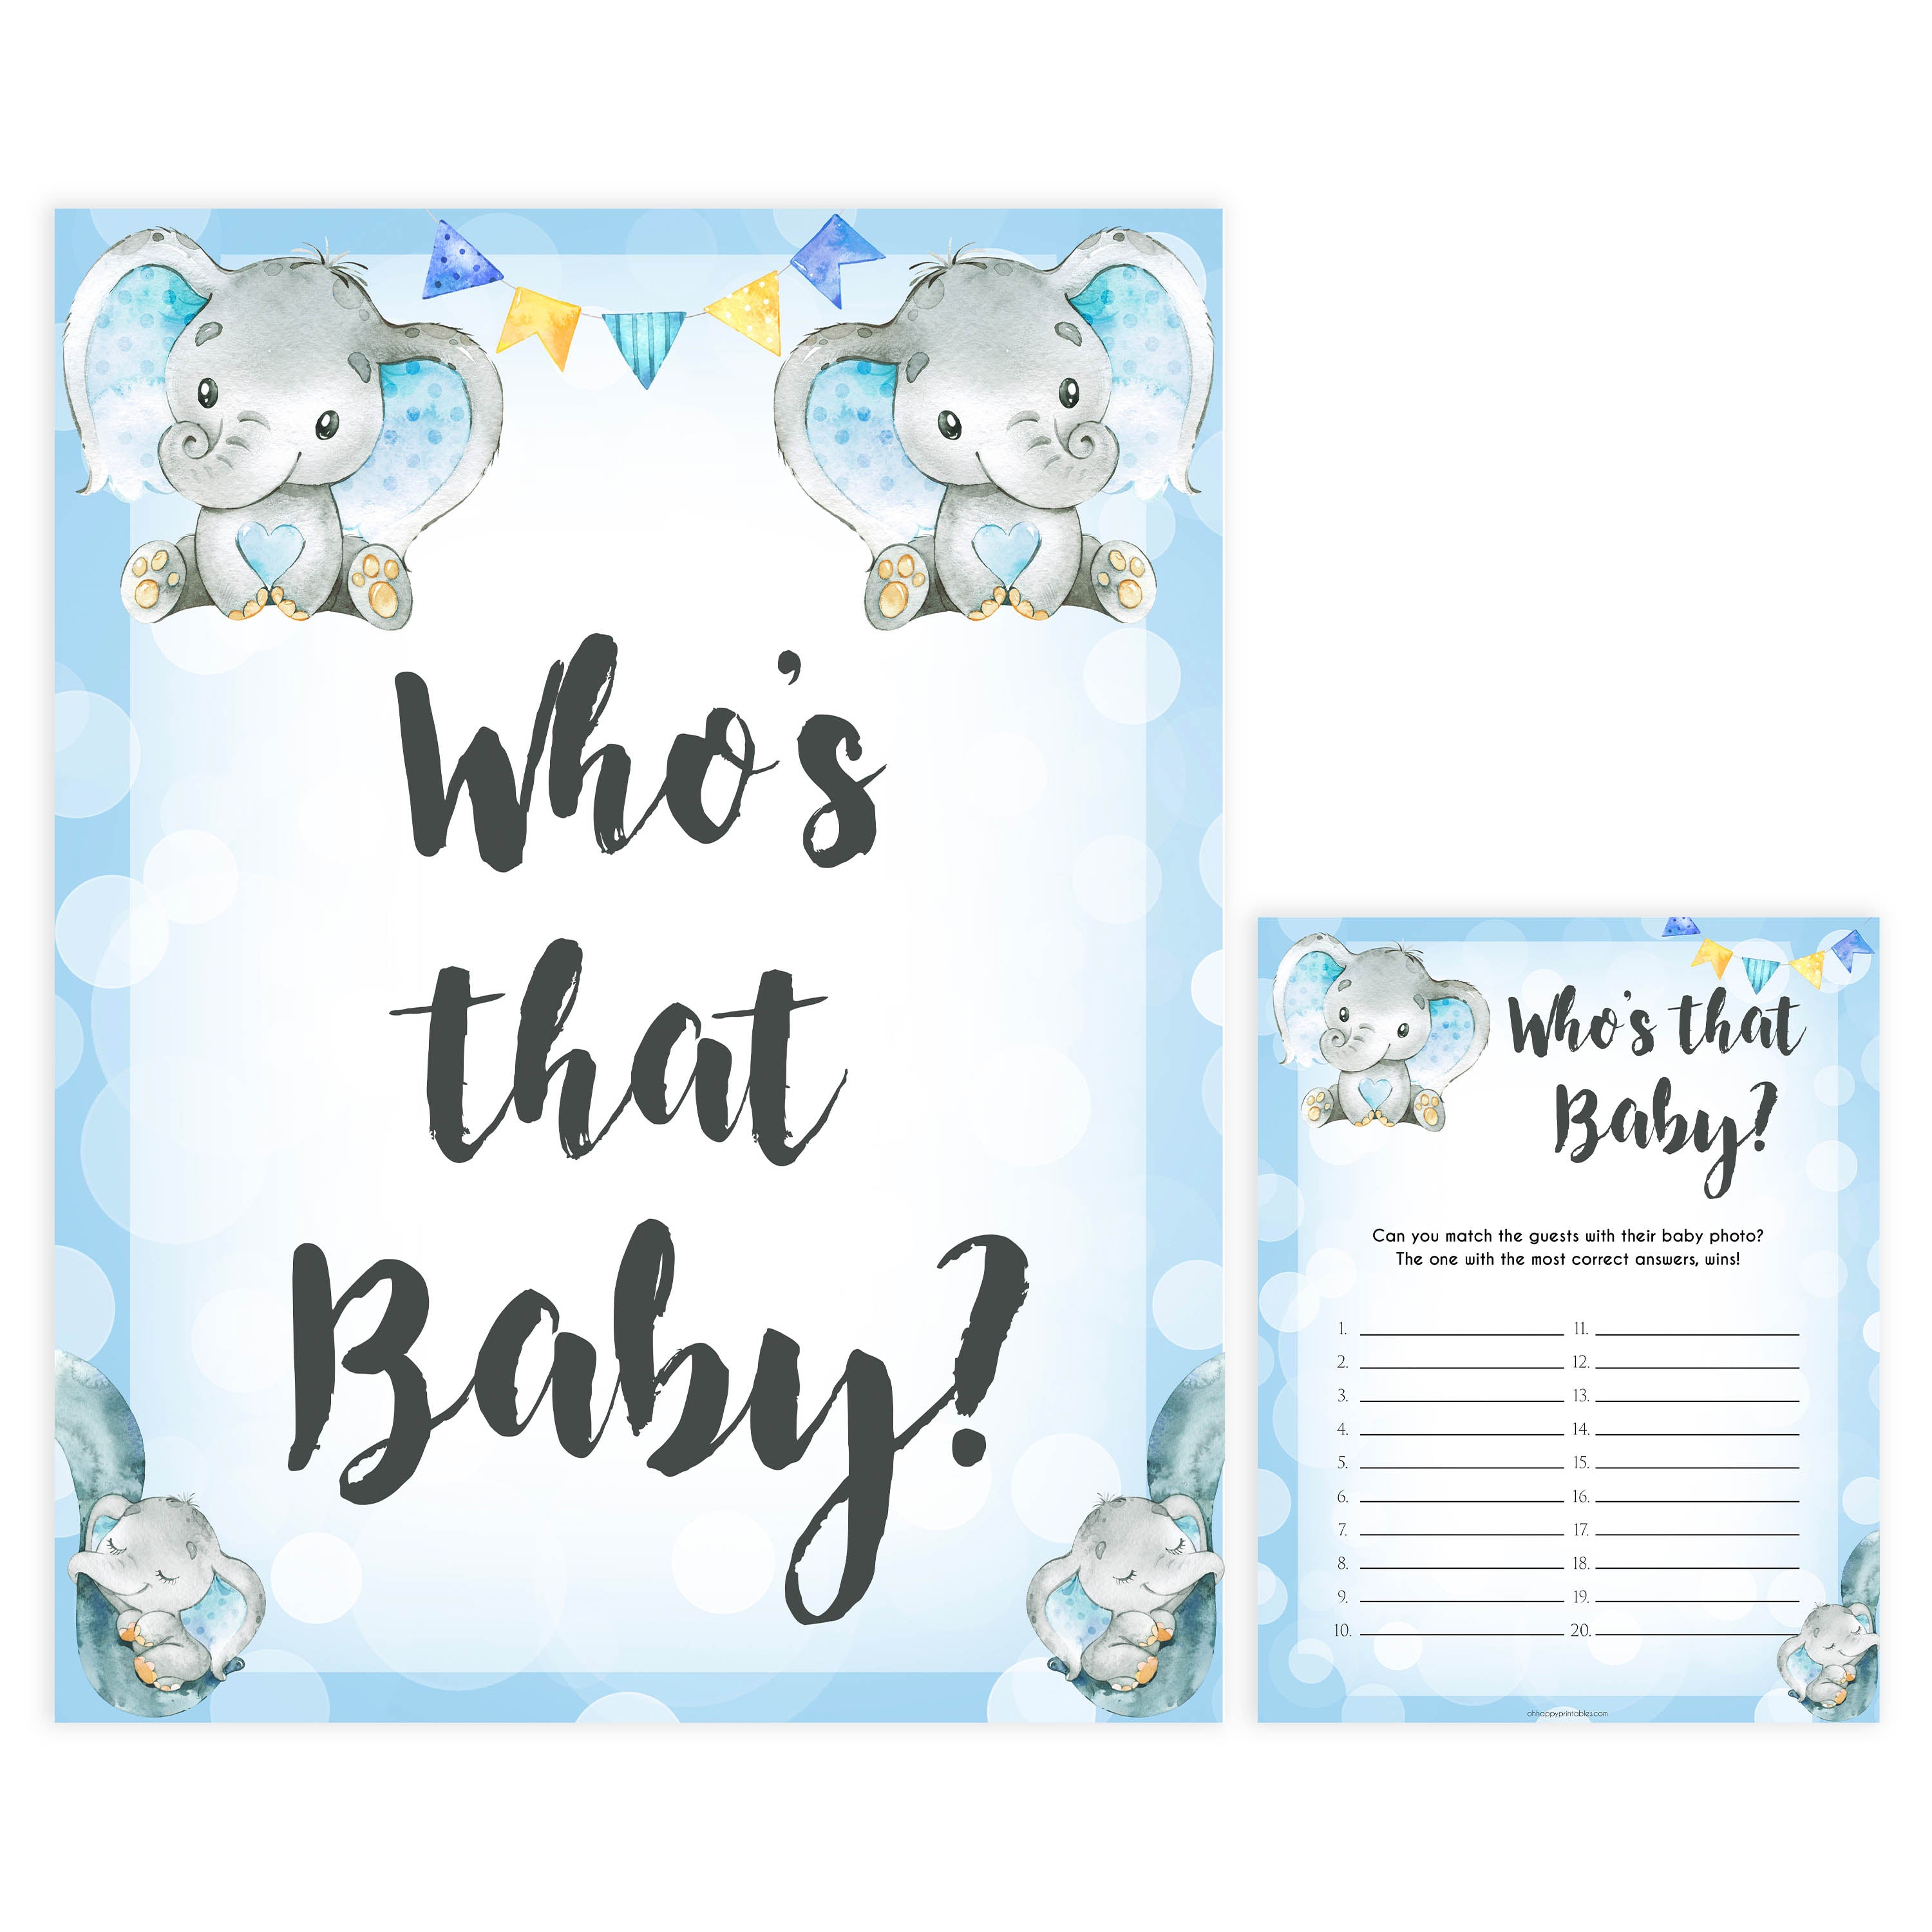 whos that baby game, guess the baby picture game, Printable baby shower games, fun baby games, baby shower games, fun baby shower ideas, top baby shower ideas, blue elephant baby shower, blue baby shower ideas